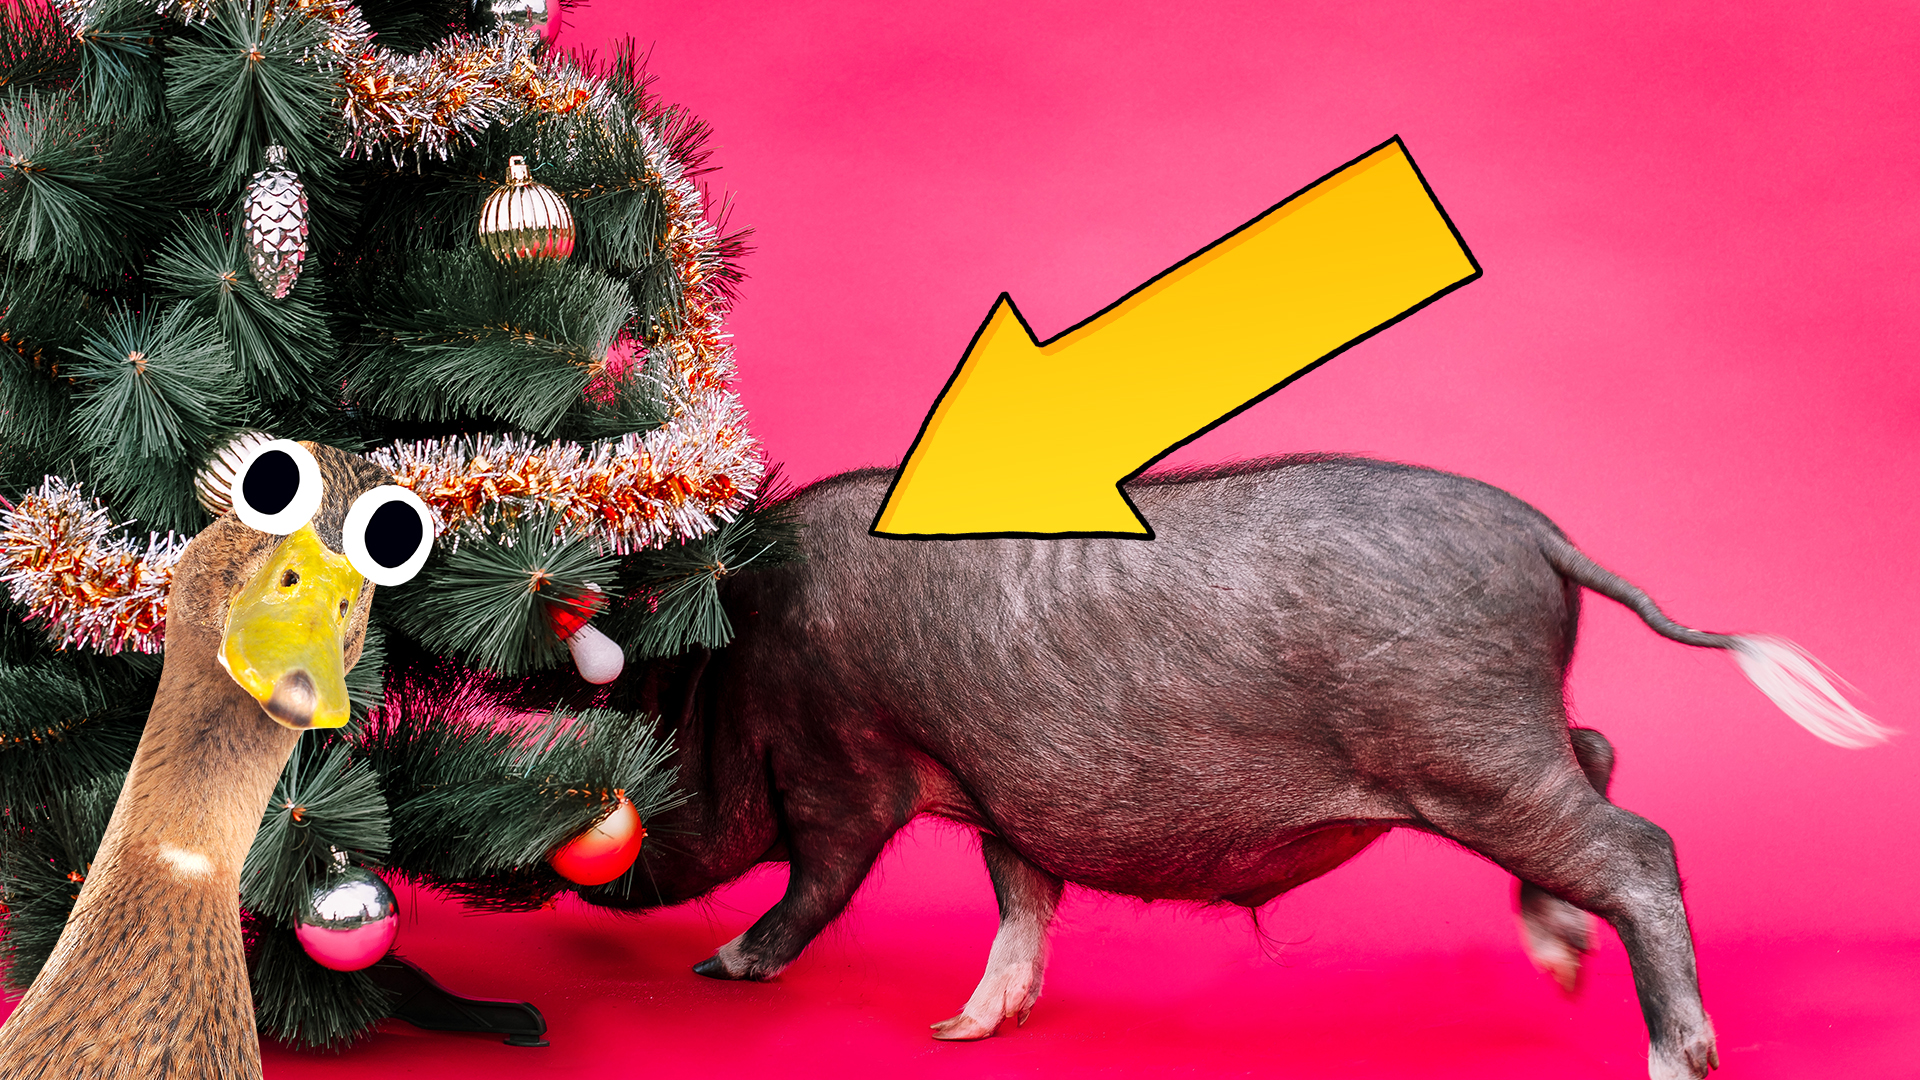 A pig looking under a Christmas tree